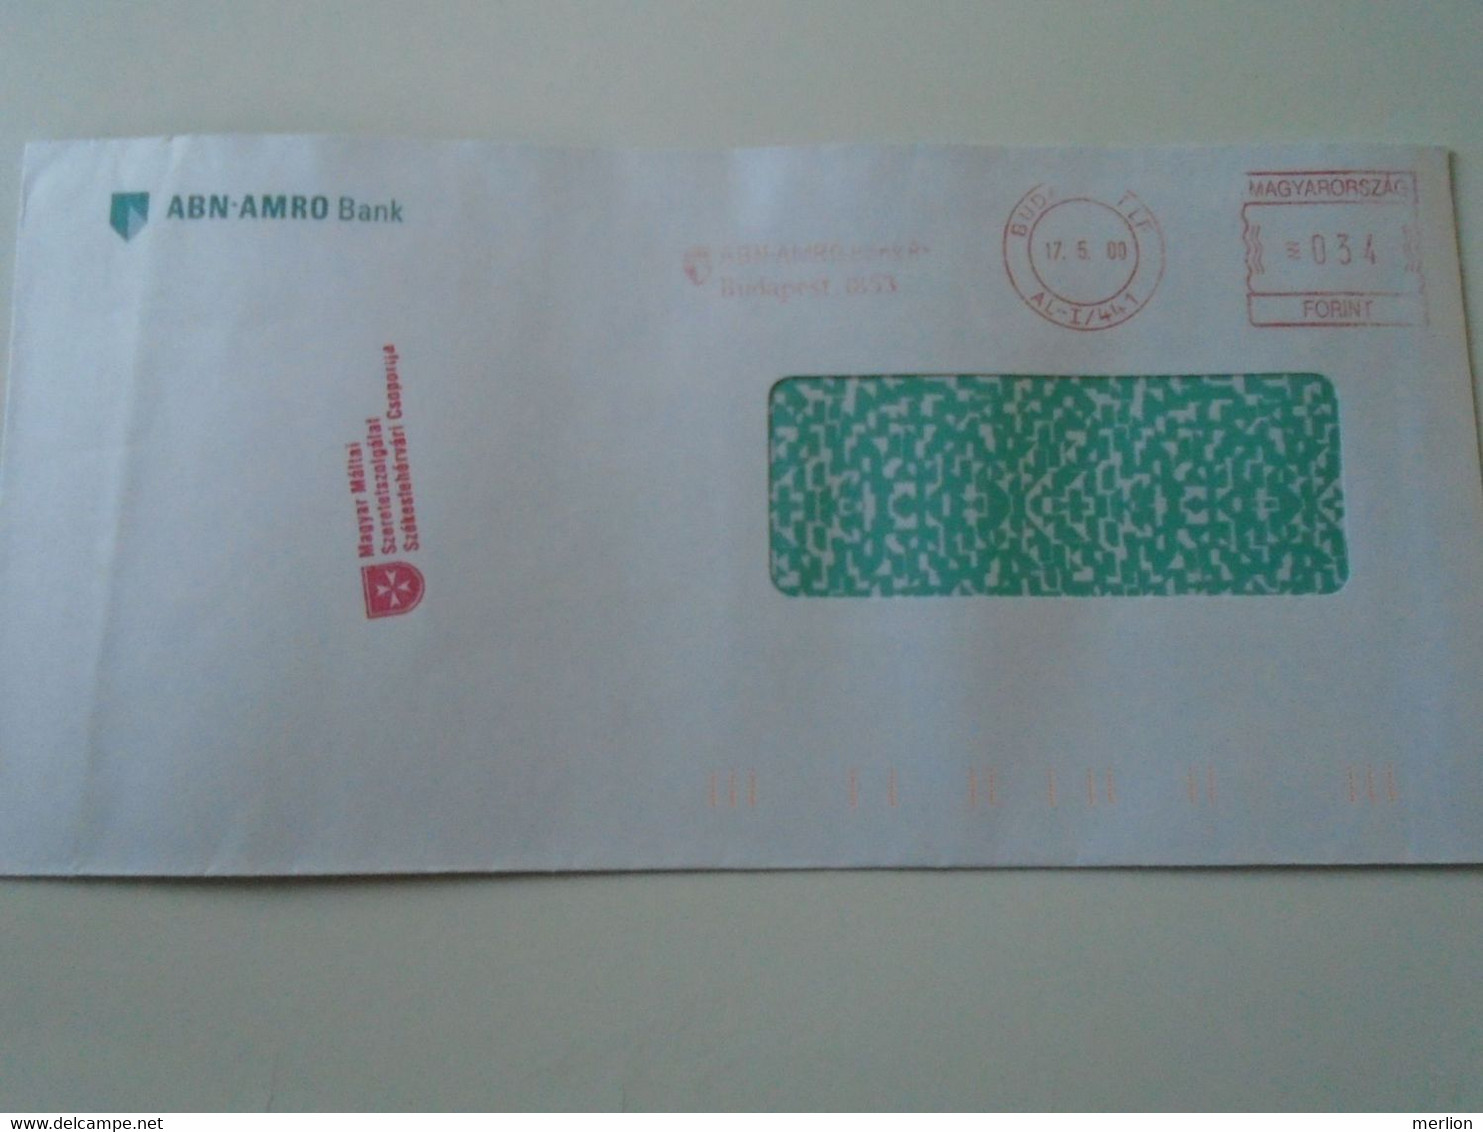 AD00012.116  Hungary Cover  -EMA Red Meter Freistempel-  Ca 2000   Budapest  ABN AMRO  Bank - Maltese Charity Service - Machine Labels [ATM]